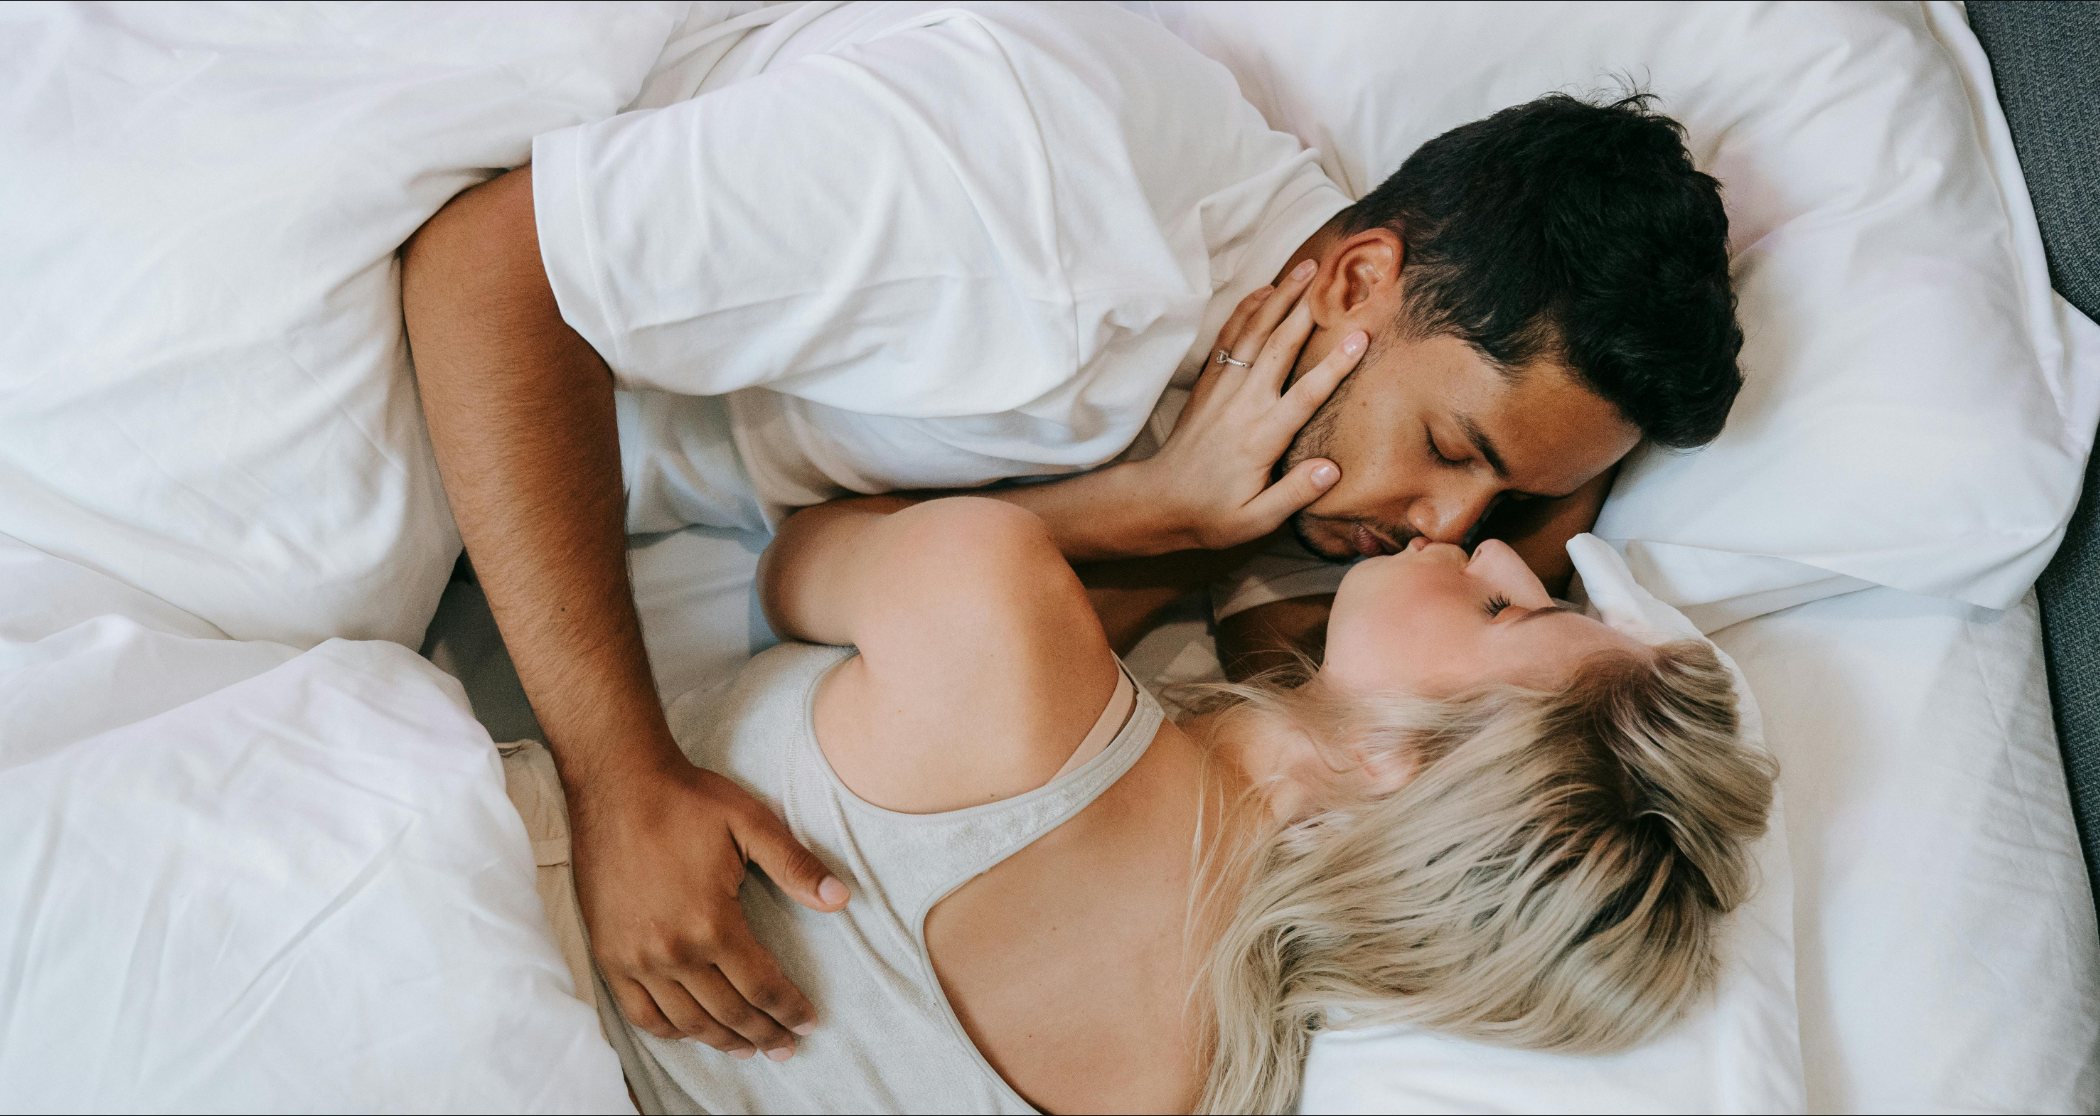 A tender moment between a diverse couple lying in bed, the woman in a grey tank top and the man in a white shirt, holding each other close, with a serene and affectionate expression on their faces, suggesting intimacy and connection in a peaceful bedroom setting